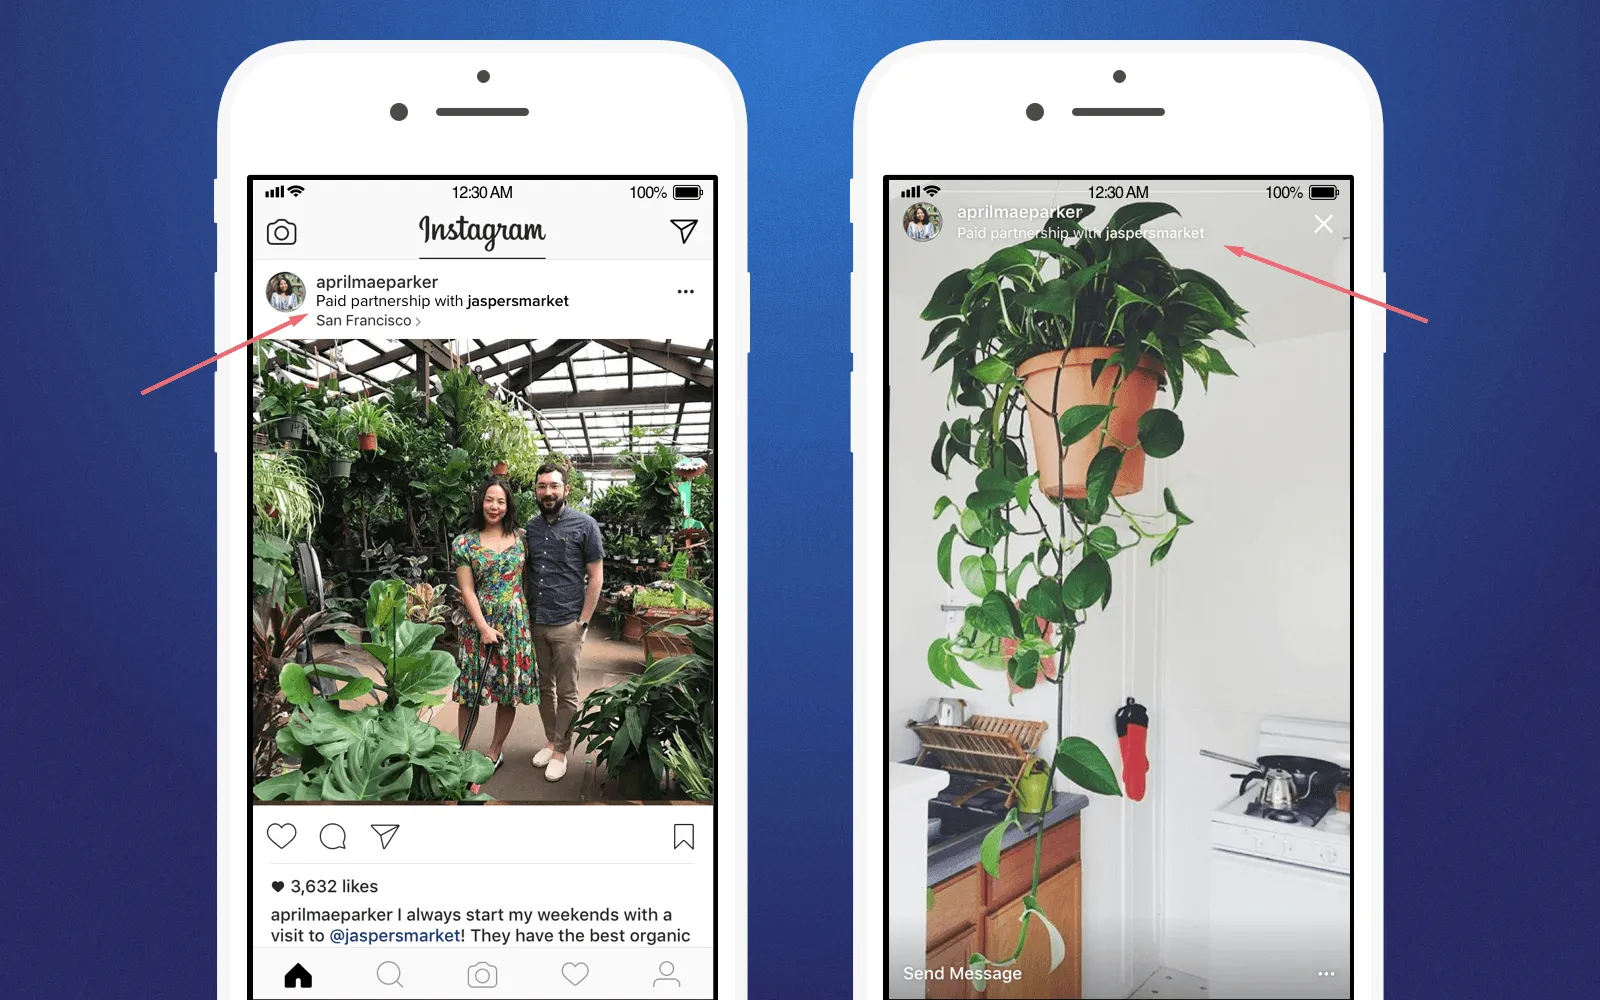 Influencer marketing trends and how Instagram indicates the sponsored posts